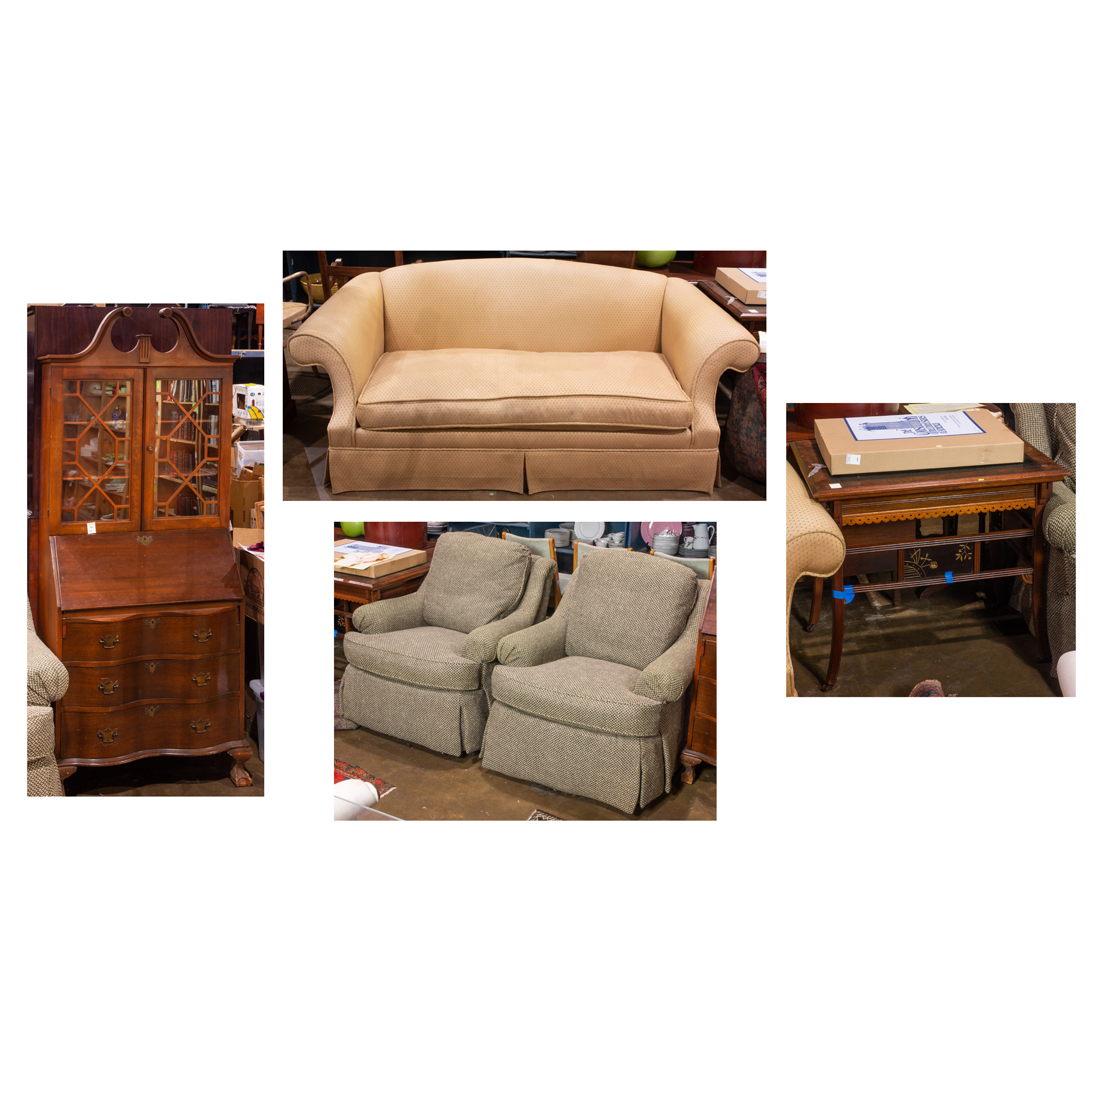  LOT OF 6 FURNITURE GROUP INCLUDING 3a2d44